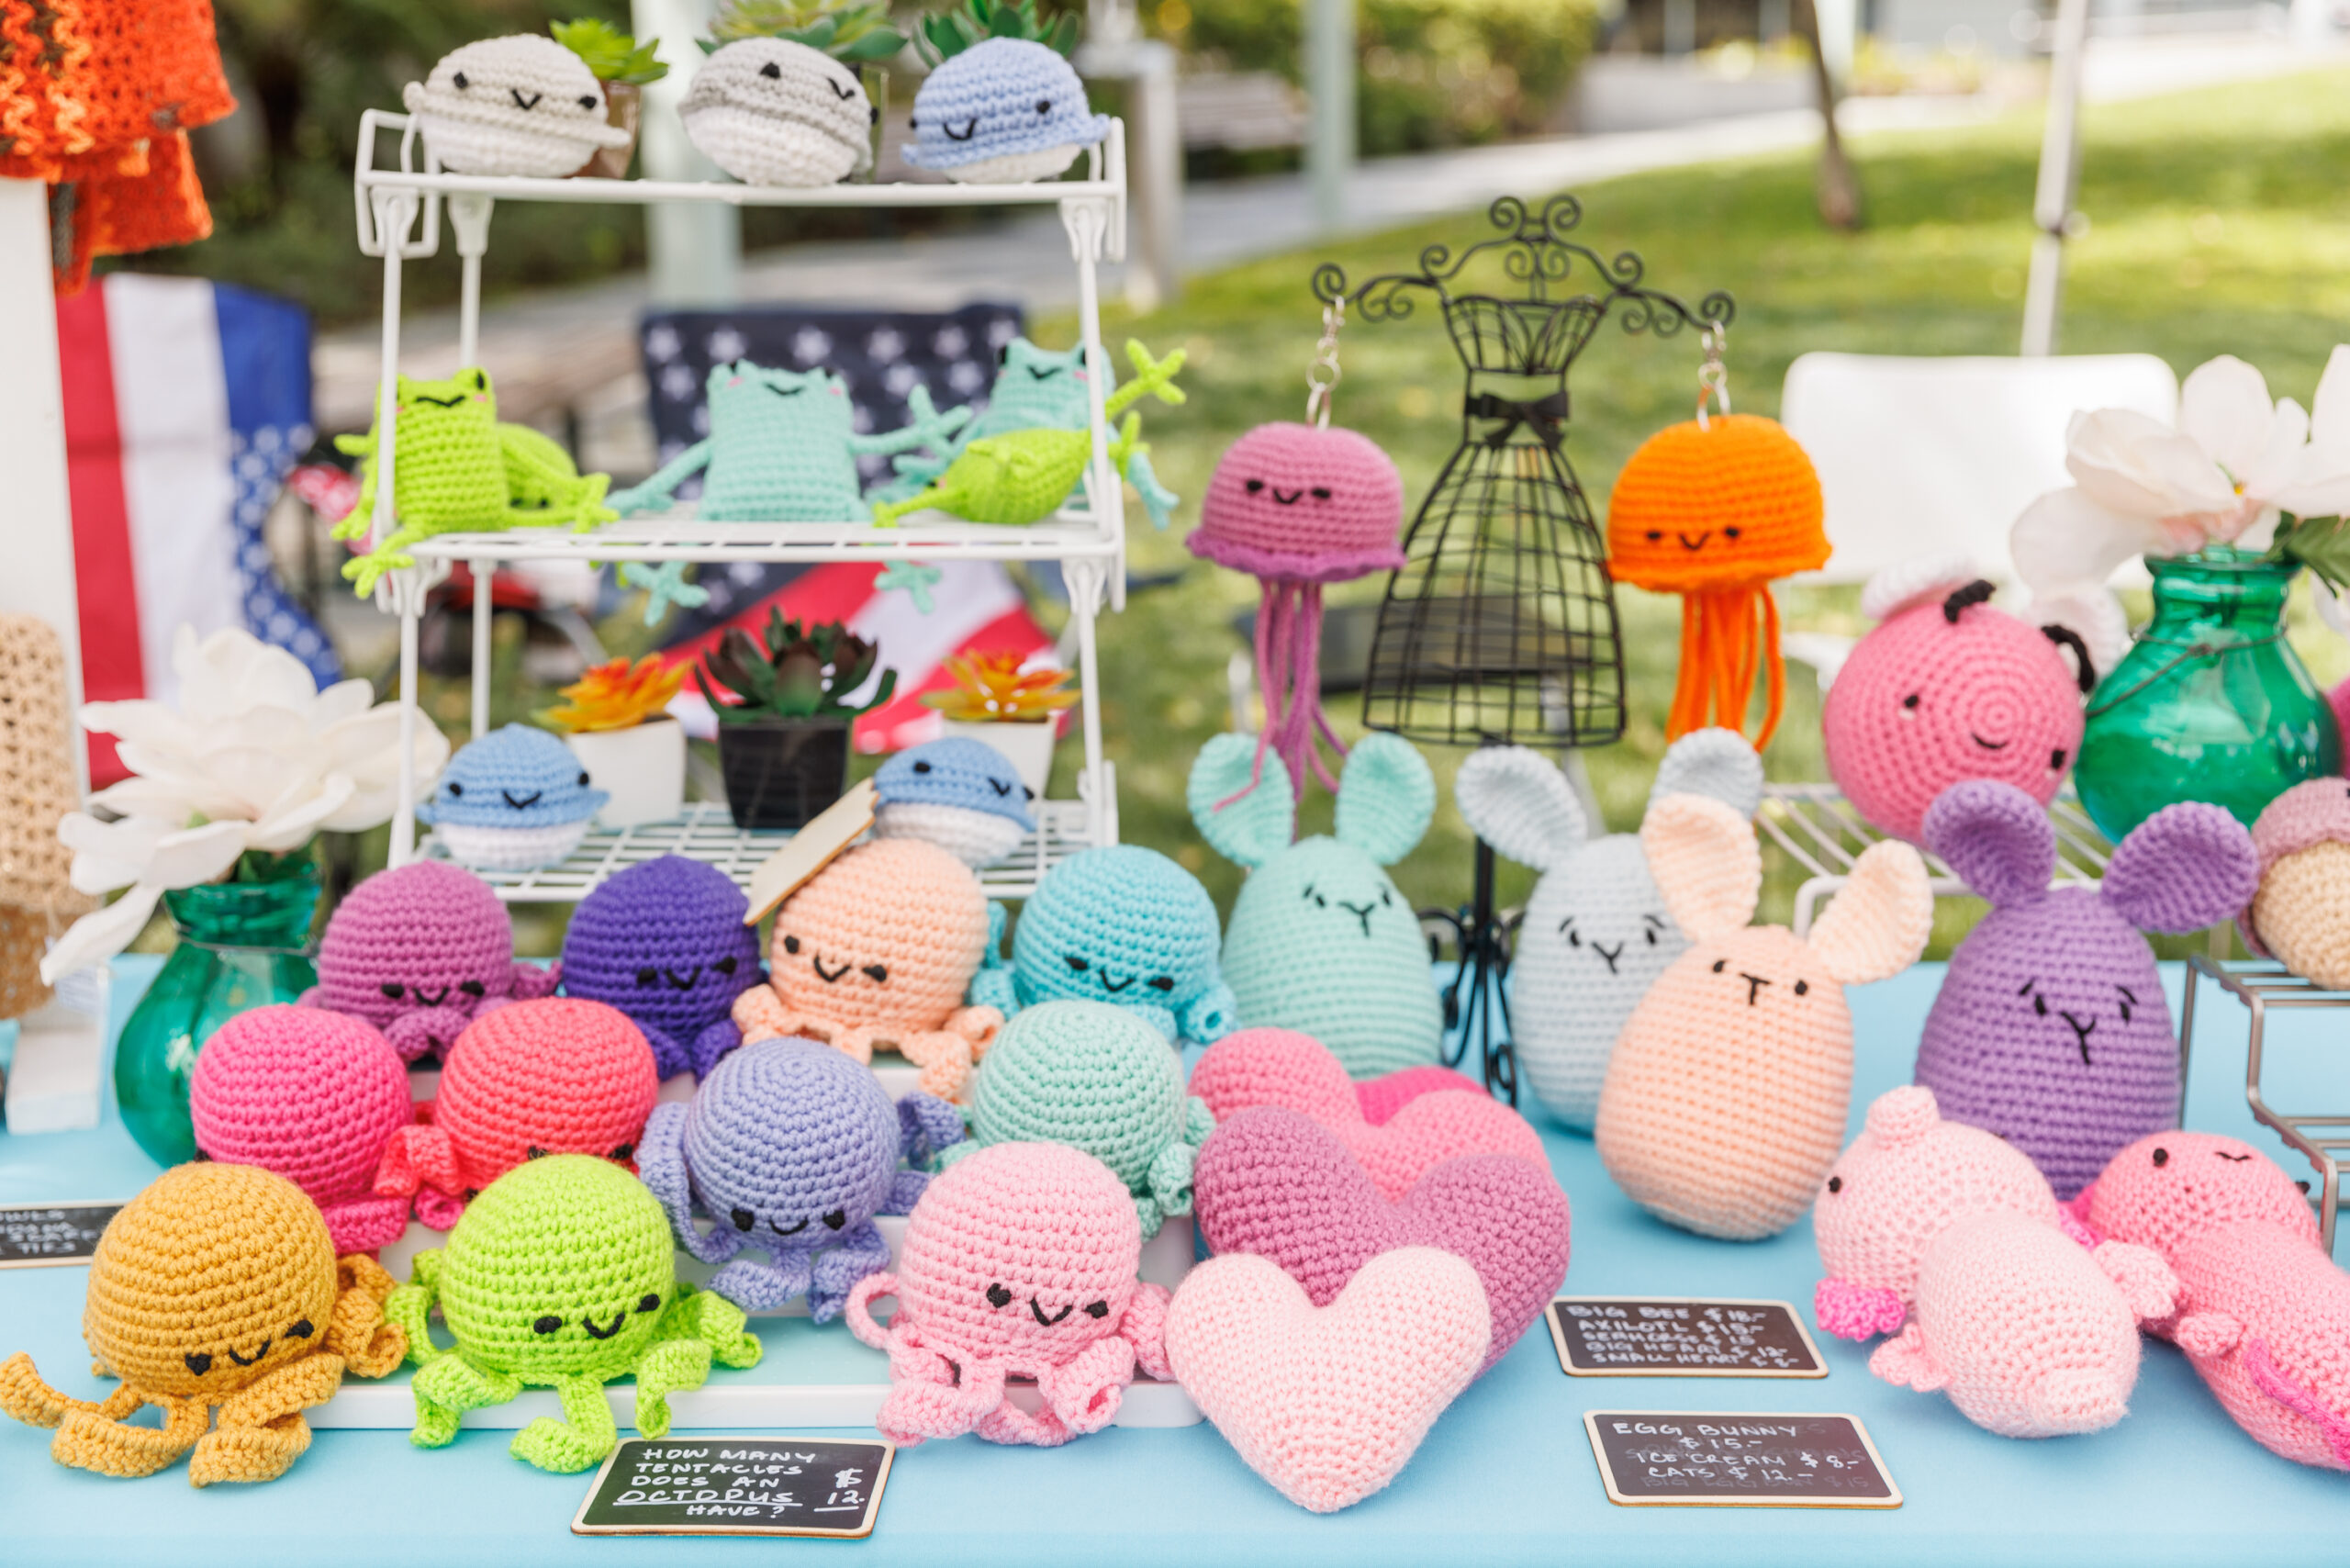 A display of colorful crocheted crafts, including whimsical octopuses, hearts, and bunnies, on a table at an outdoor market.